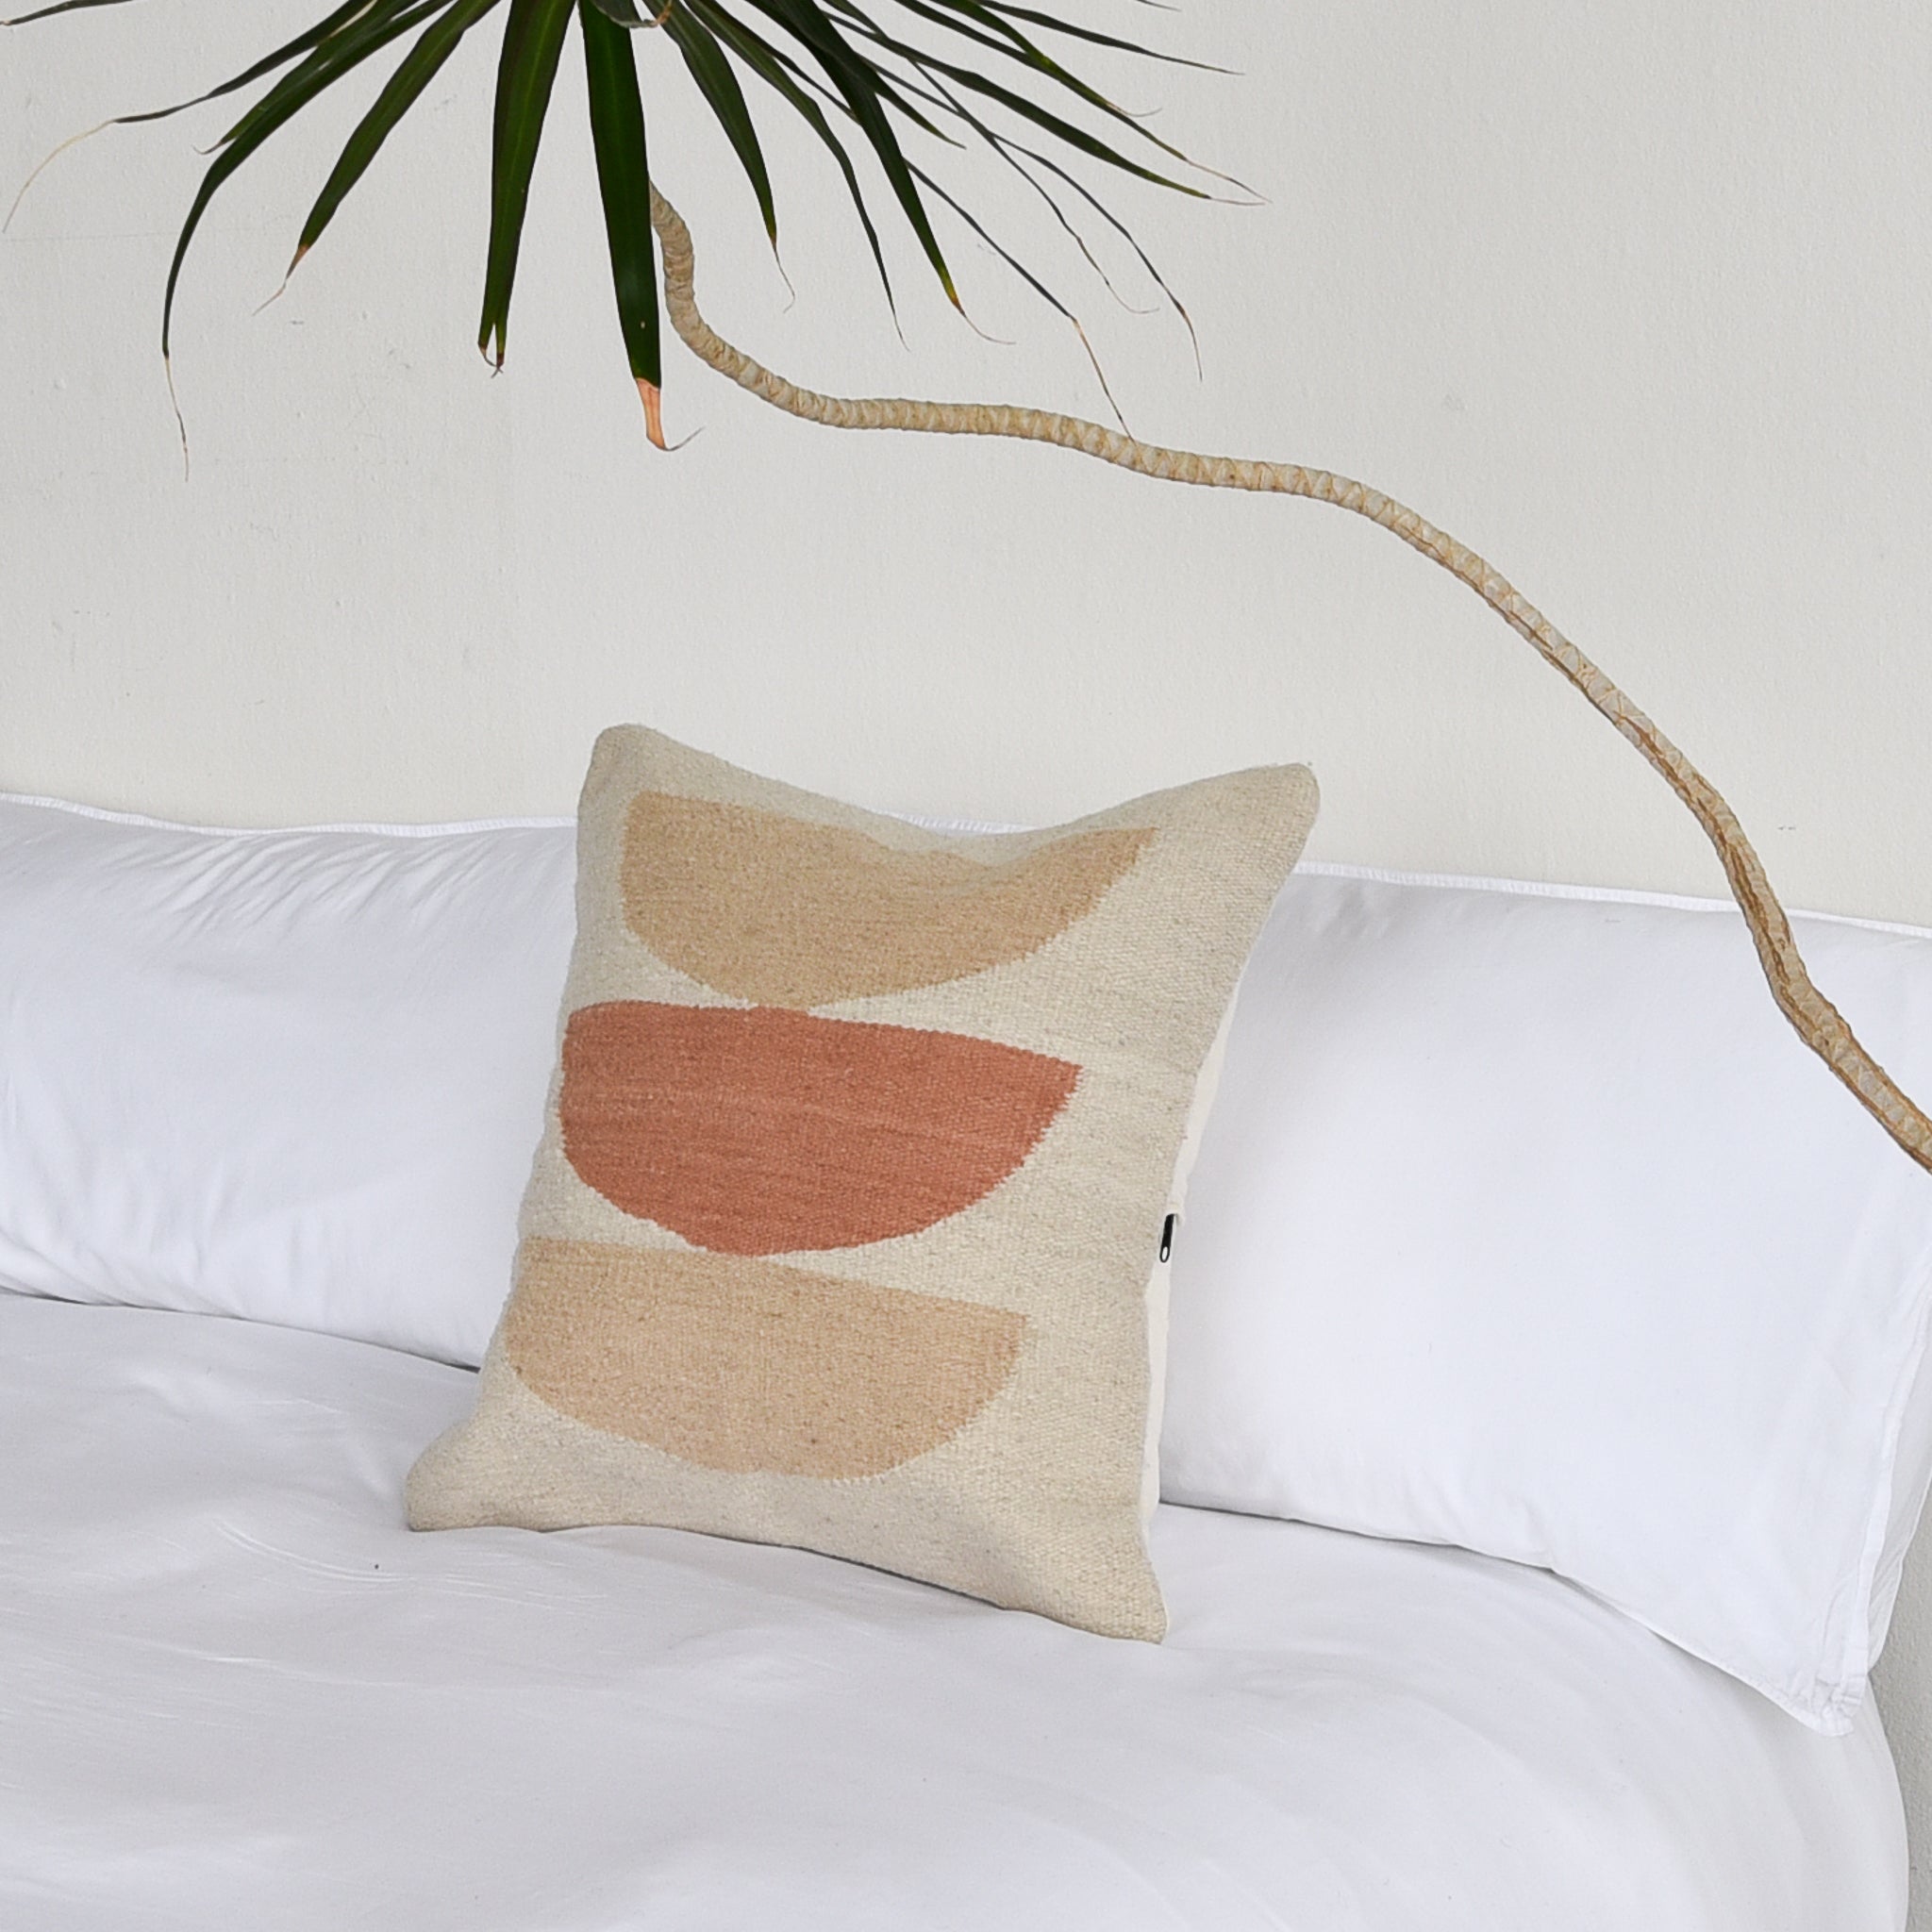 A wool throw pillow in desert colors on a white bed with the branch of a yucca overhanging the pillow.